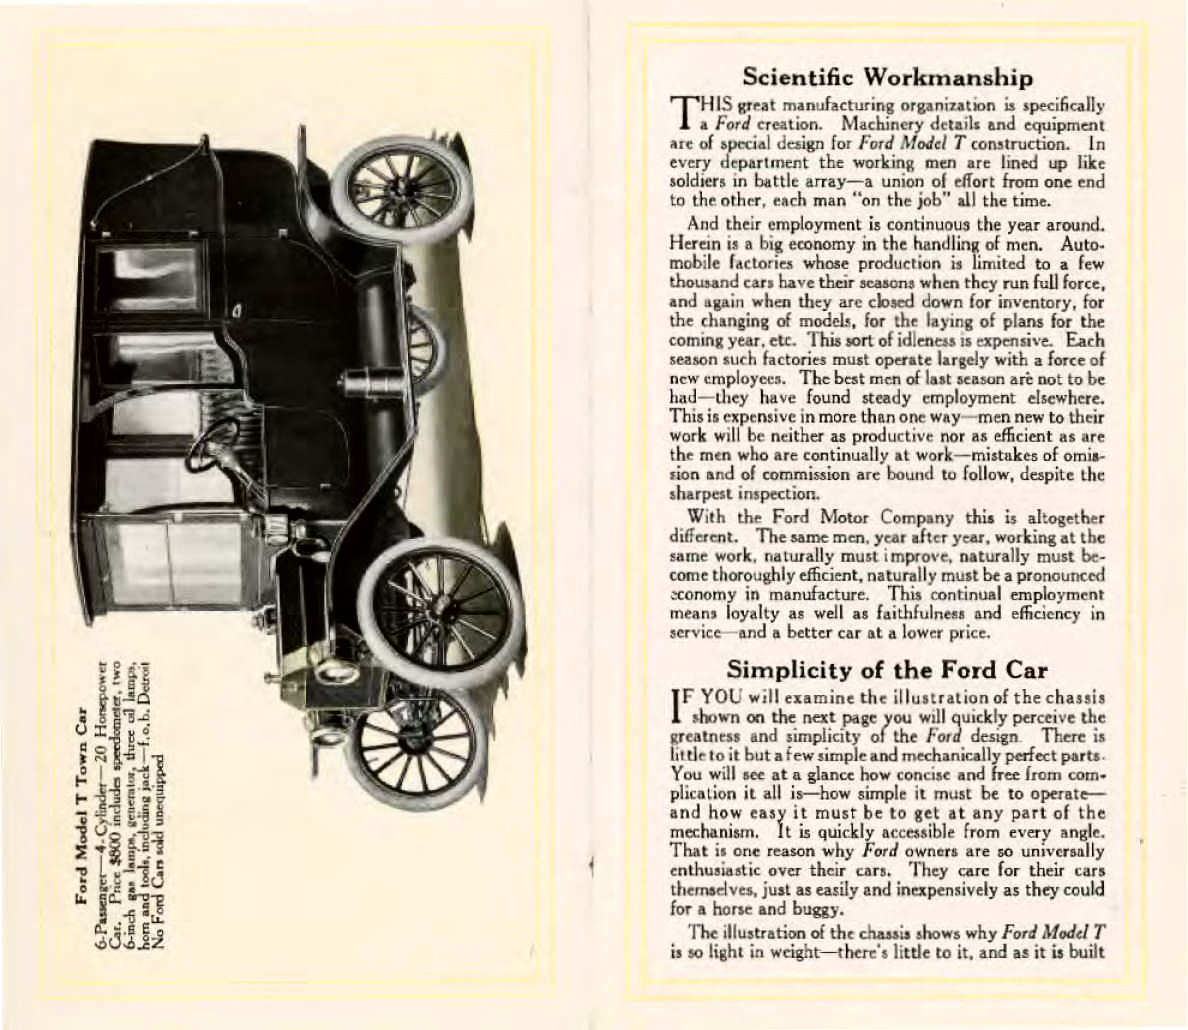 1913_Ford_Sm-08-09